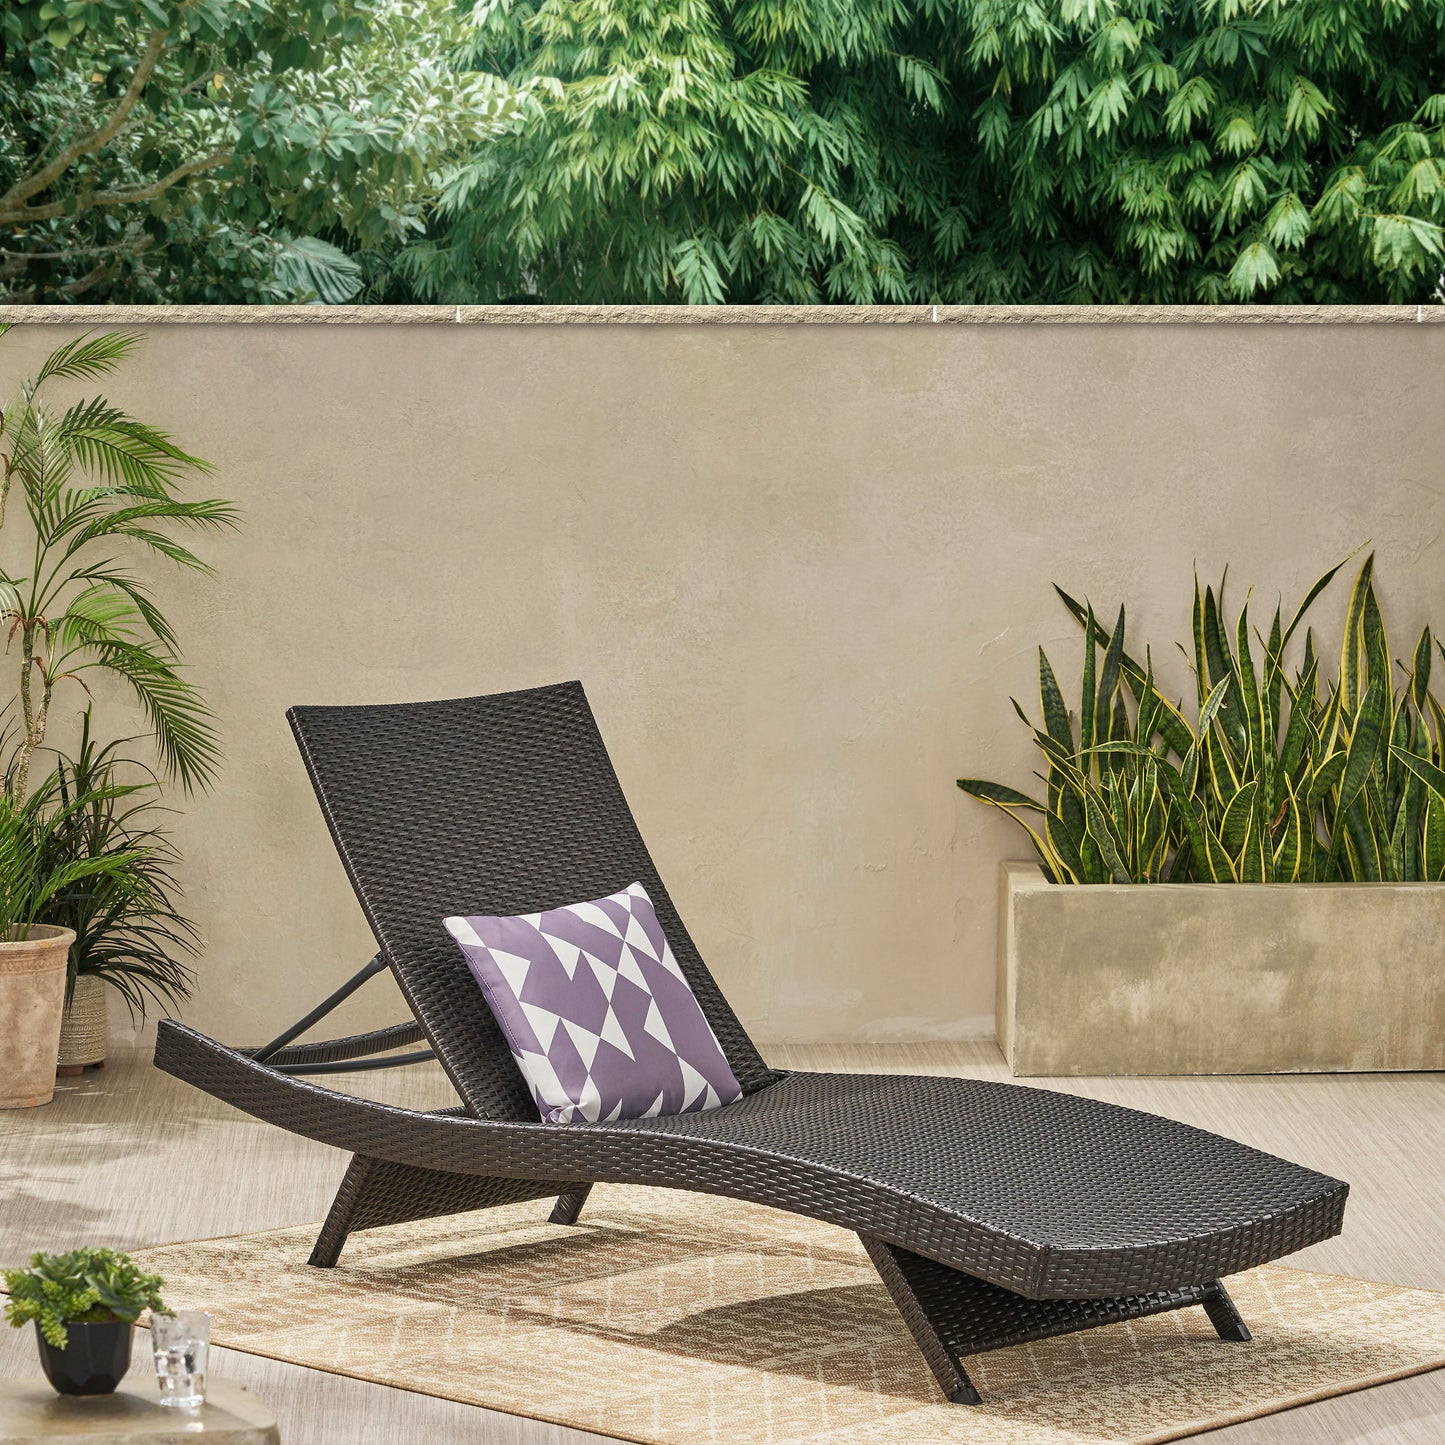 Salem Brown Wicker Curved Outdoor Chaise Lounge Chair w/ Adjustable Angle Back